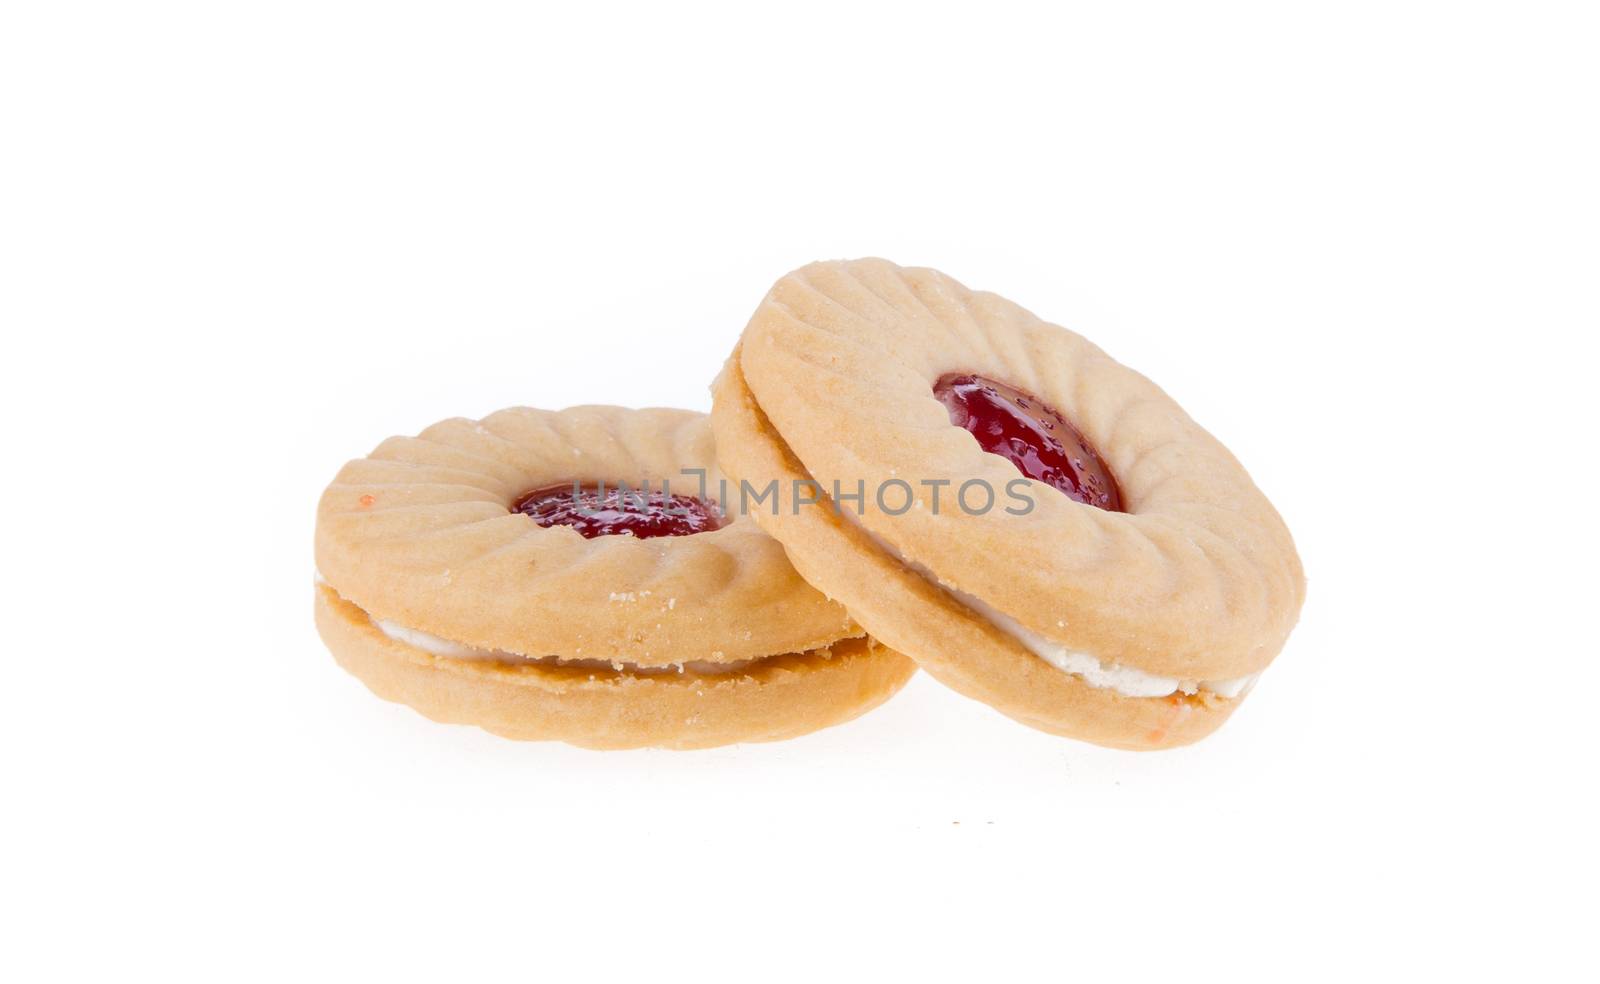 Sandwich biscuits with strawberry filling